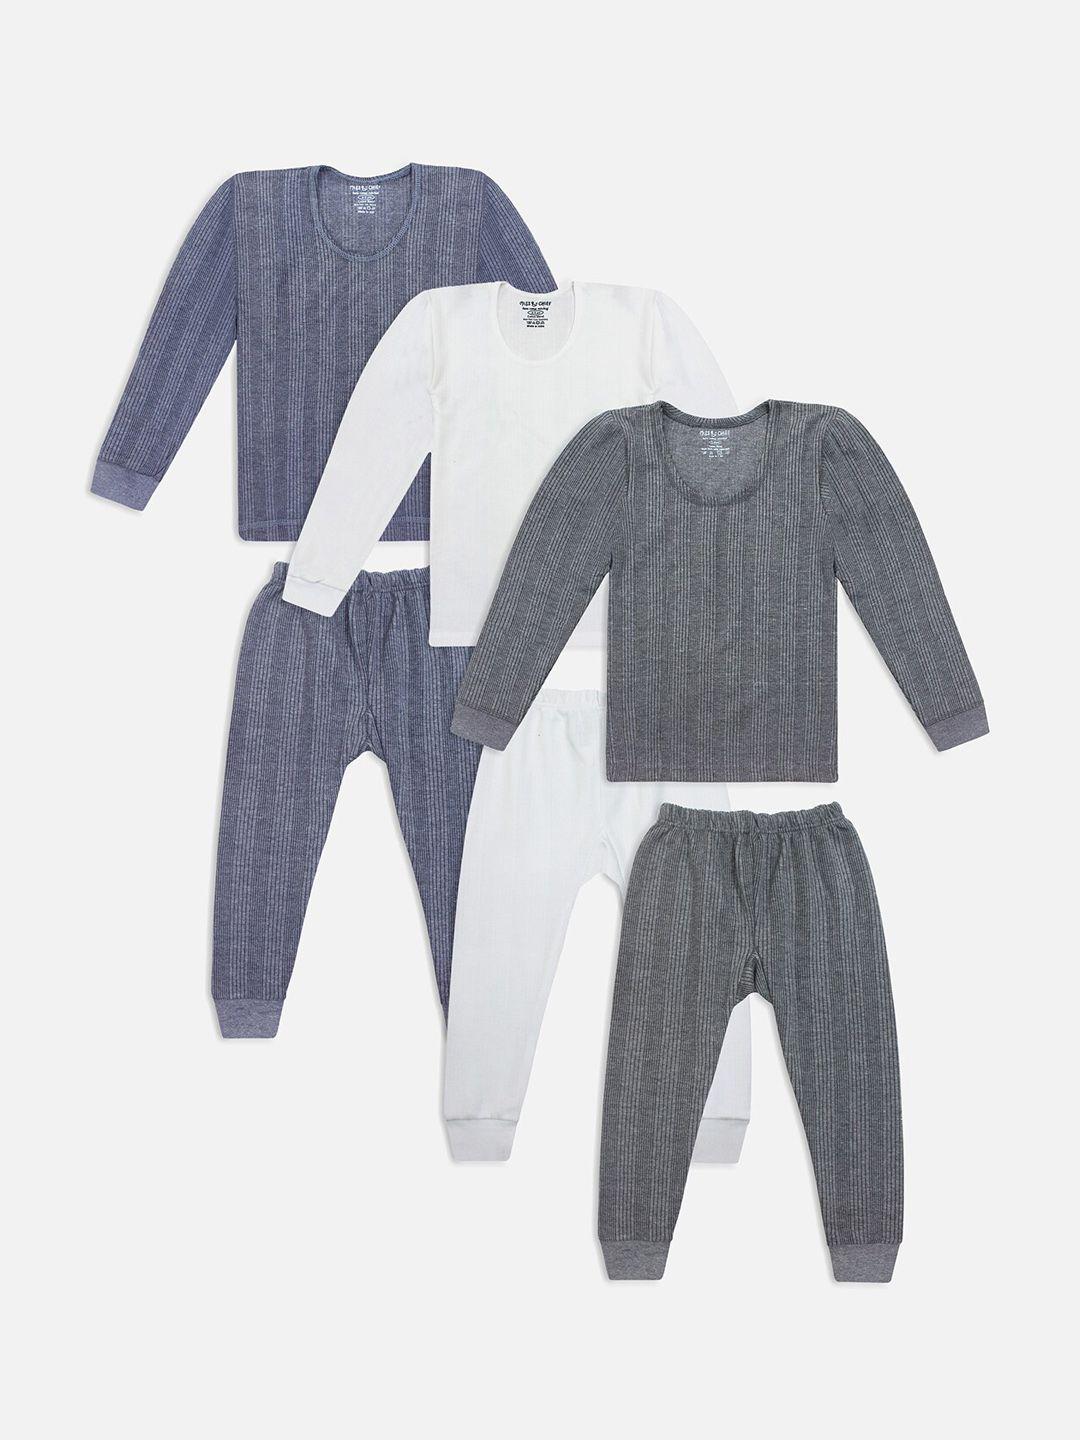 miss & chief kids pack of 3 grey & off-white striped thermal sets